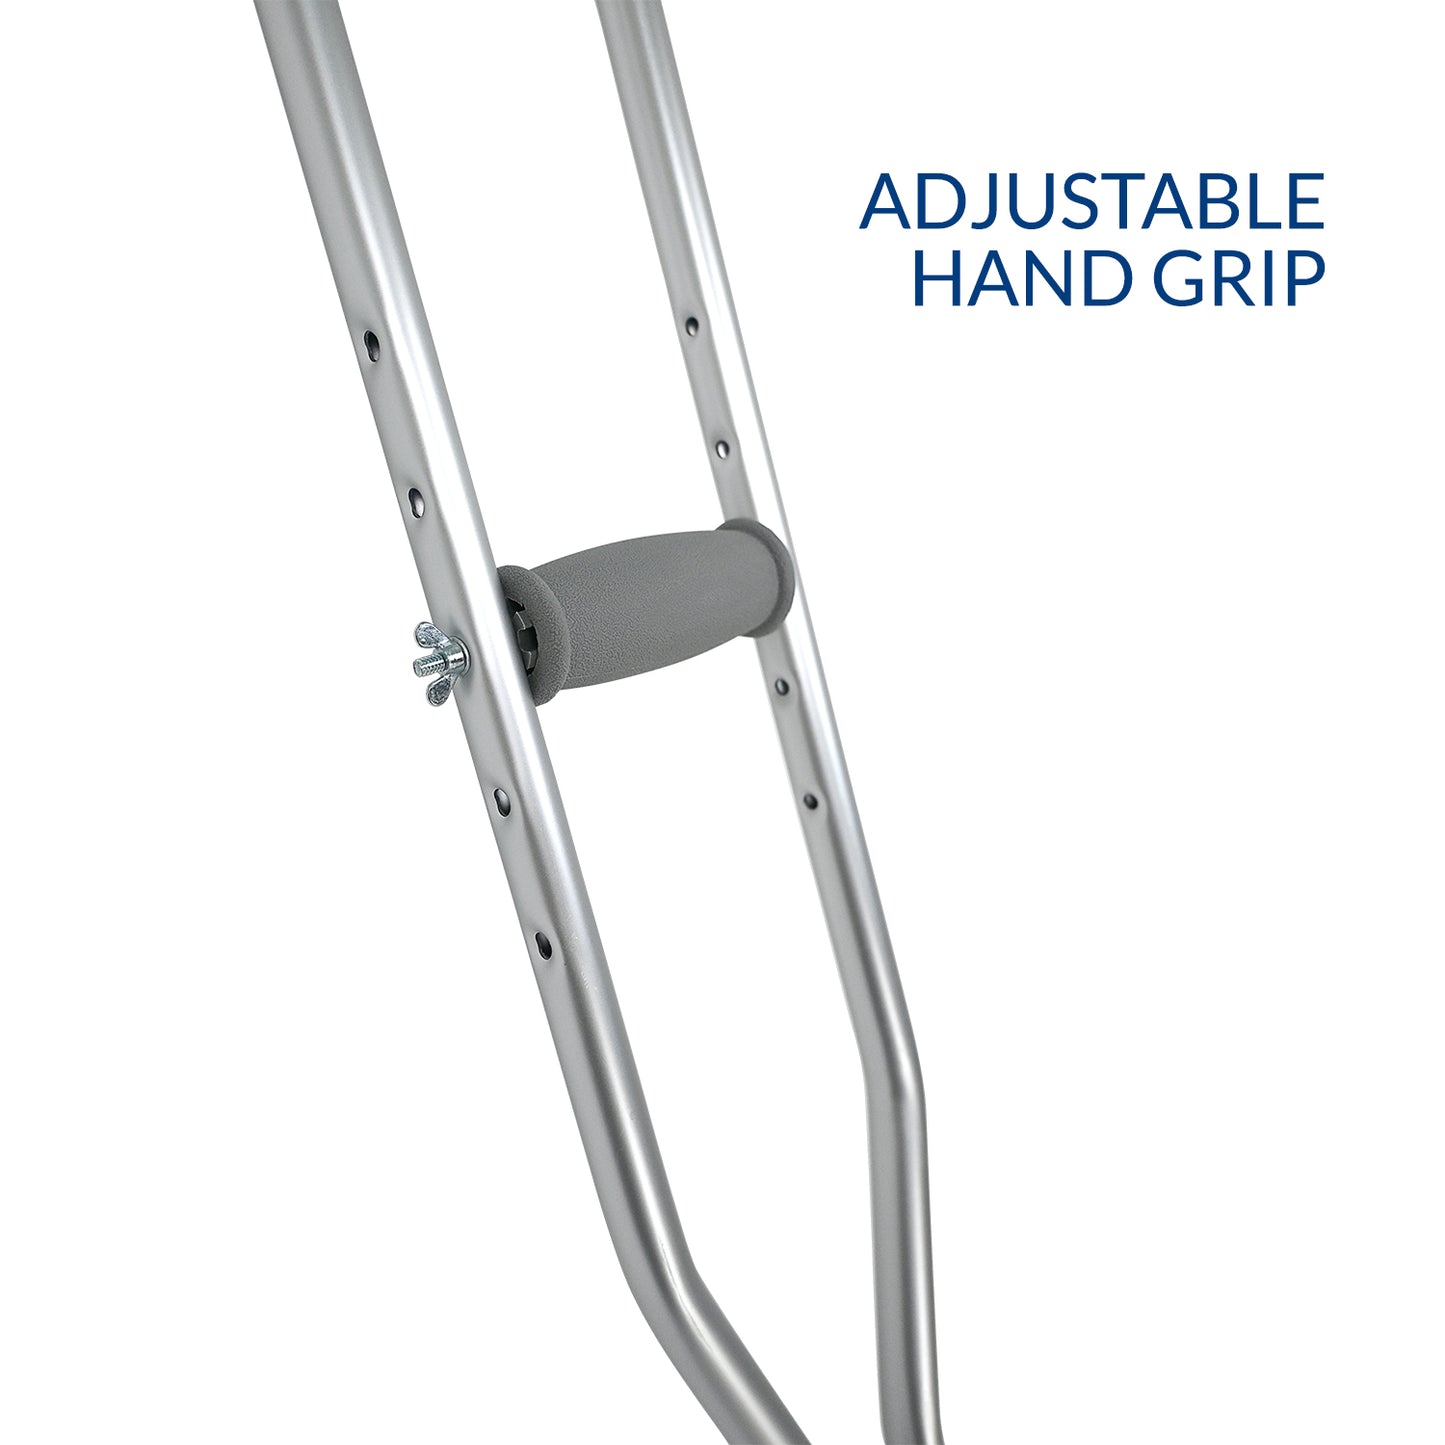 iCare® UC110 StepAid Aluminum Crutch with Adjustable Hand Grip, Adjustable Length and Anti-Slip Tip for Disability and Injury Support